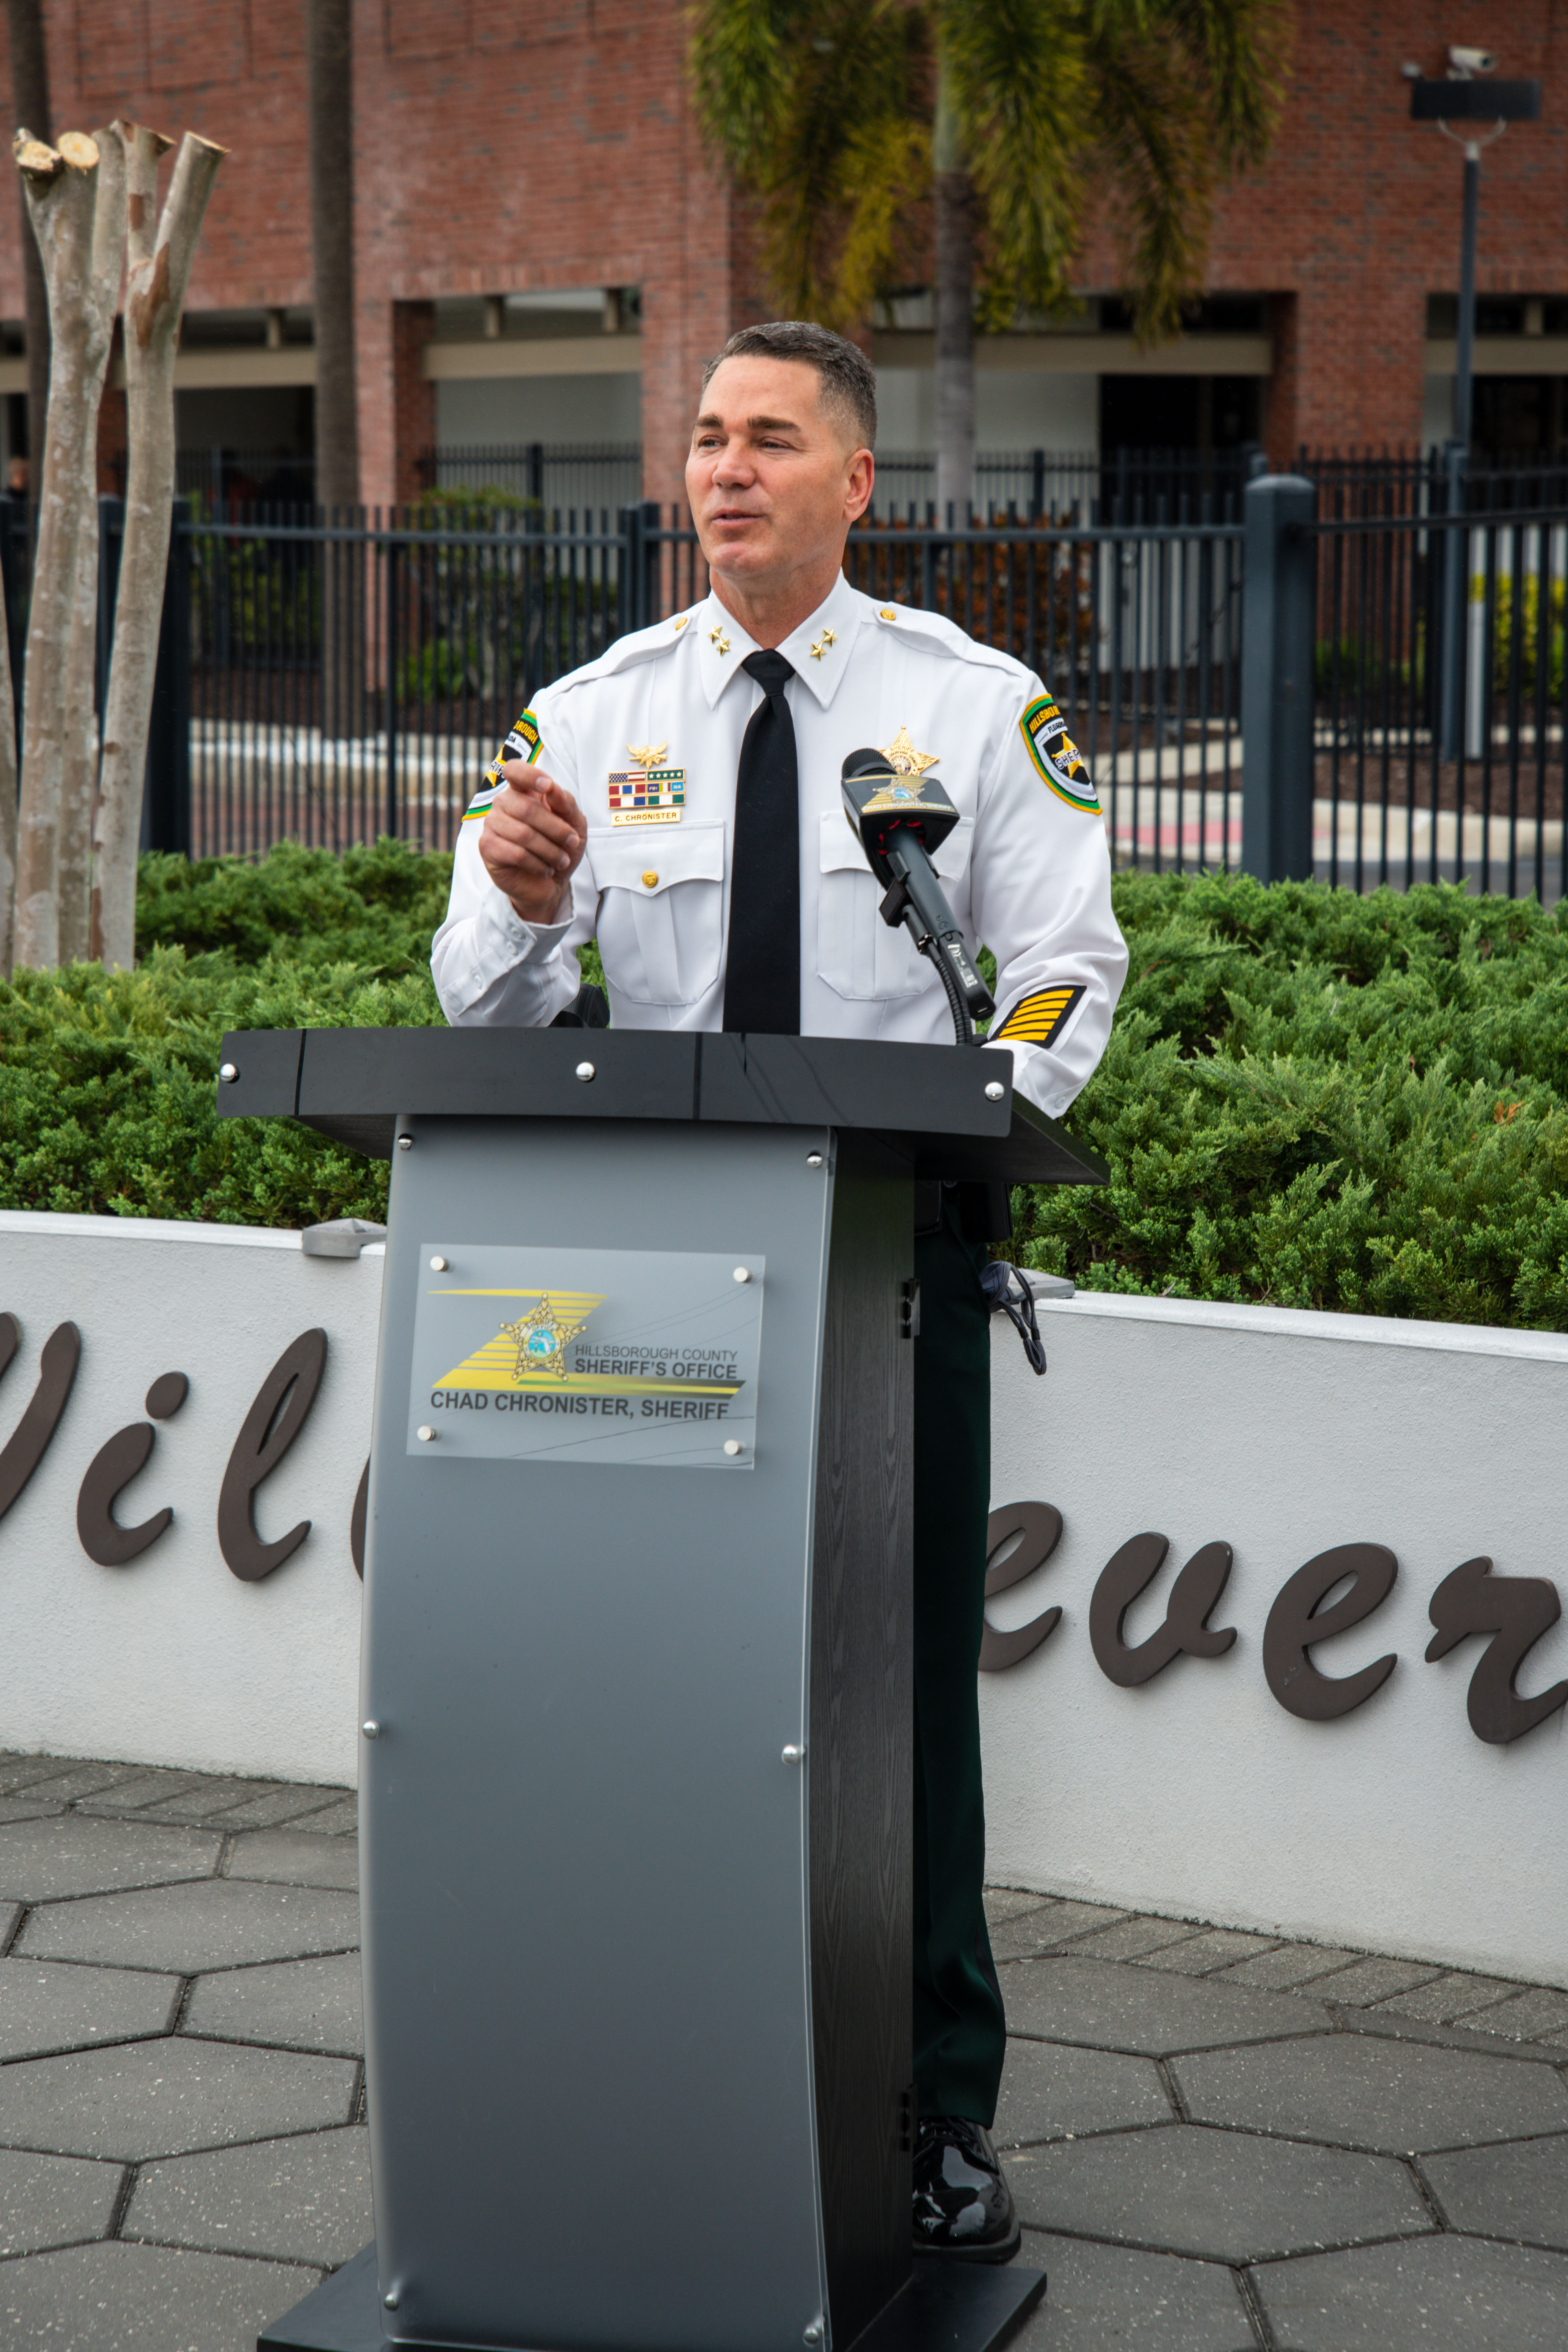 Sheriff Chad Chronister and HCSO recognize community partners dedicated to preventing crime